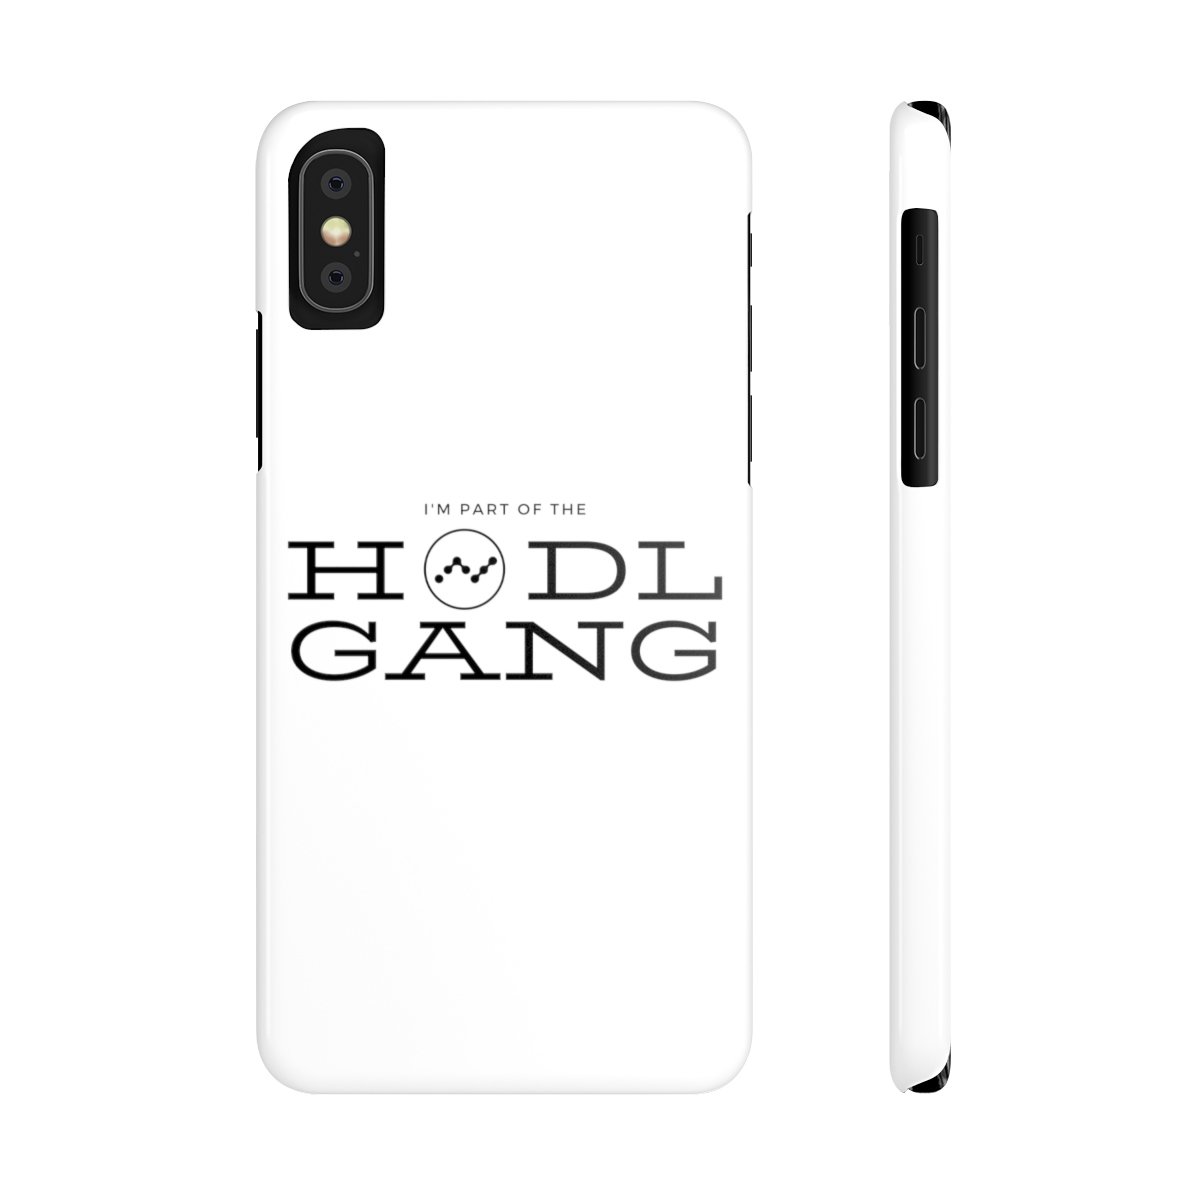 Hodl gang (Nano) - Case Mate Slim Phone Case TCP1607 iPhone XS Official Crypto Merch